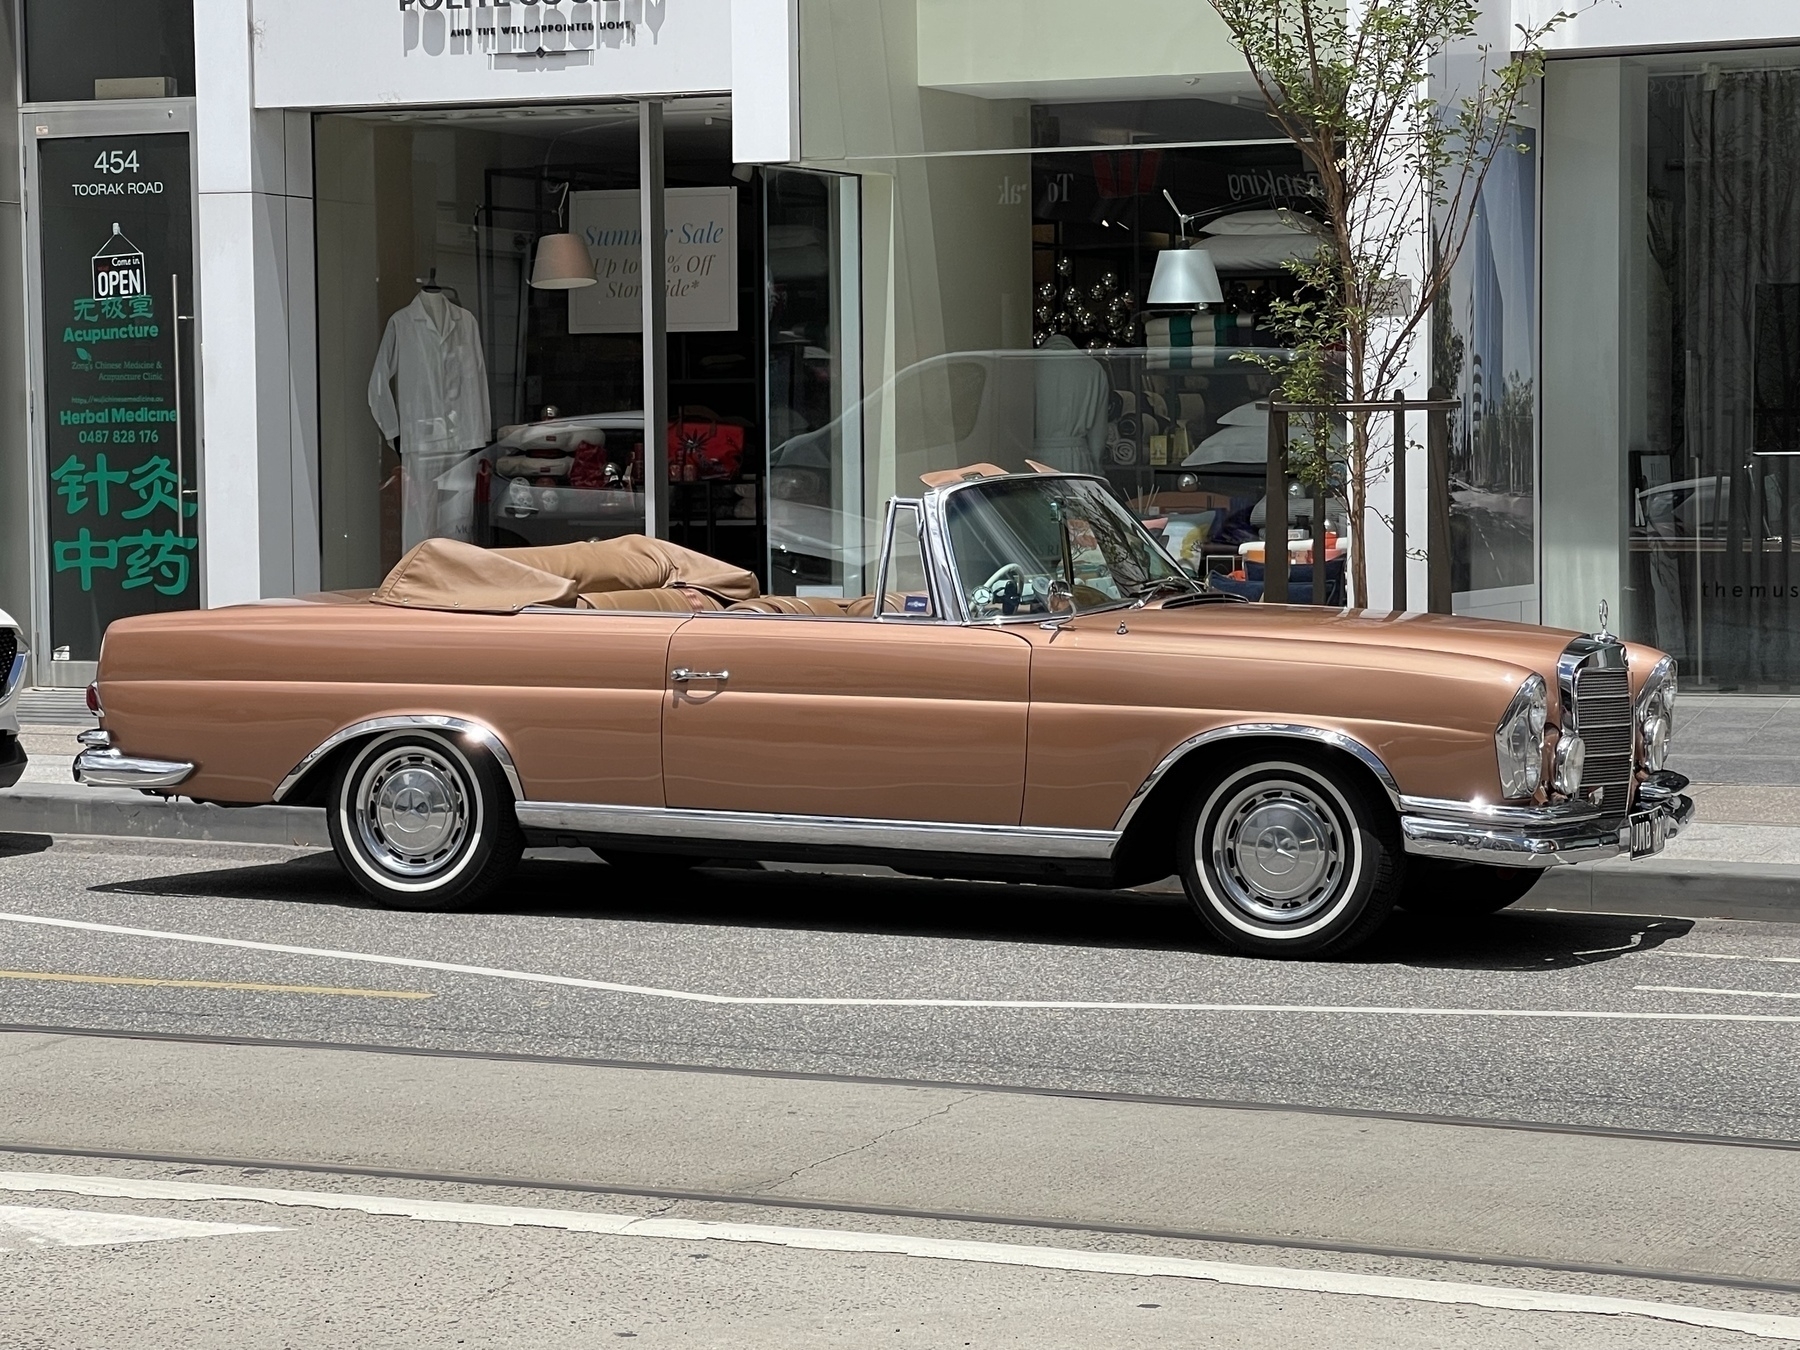 A copper coloured vintage Mercedes Benz 220 SE. Two door convertible with the top down.